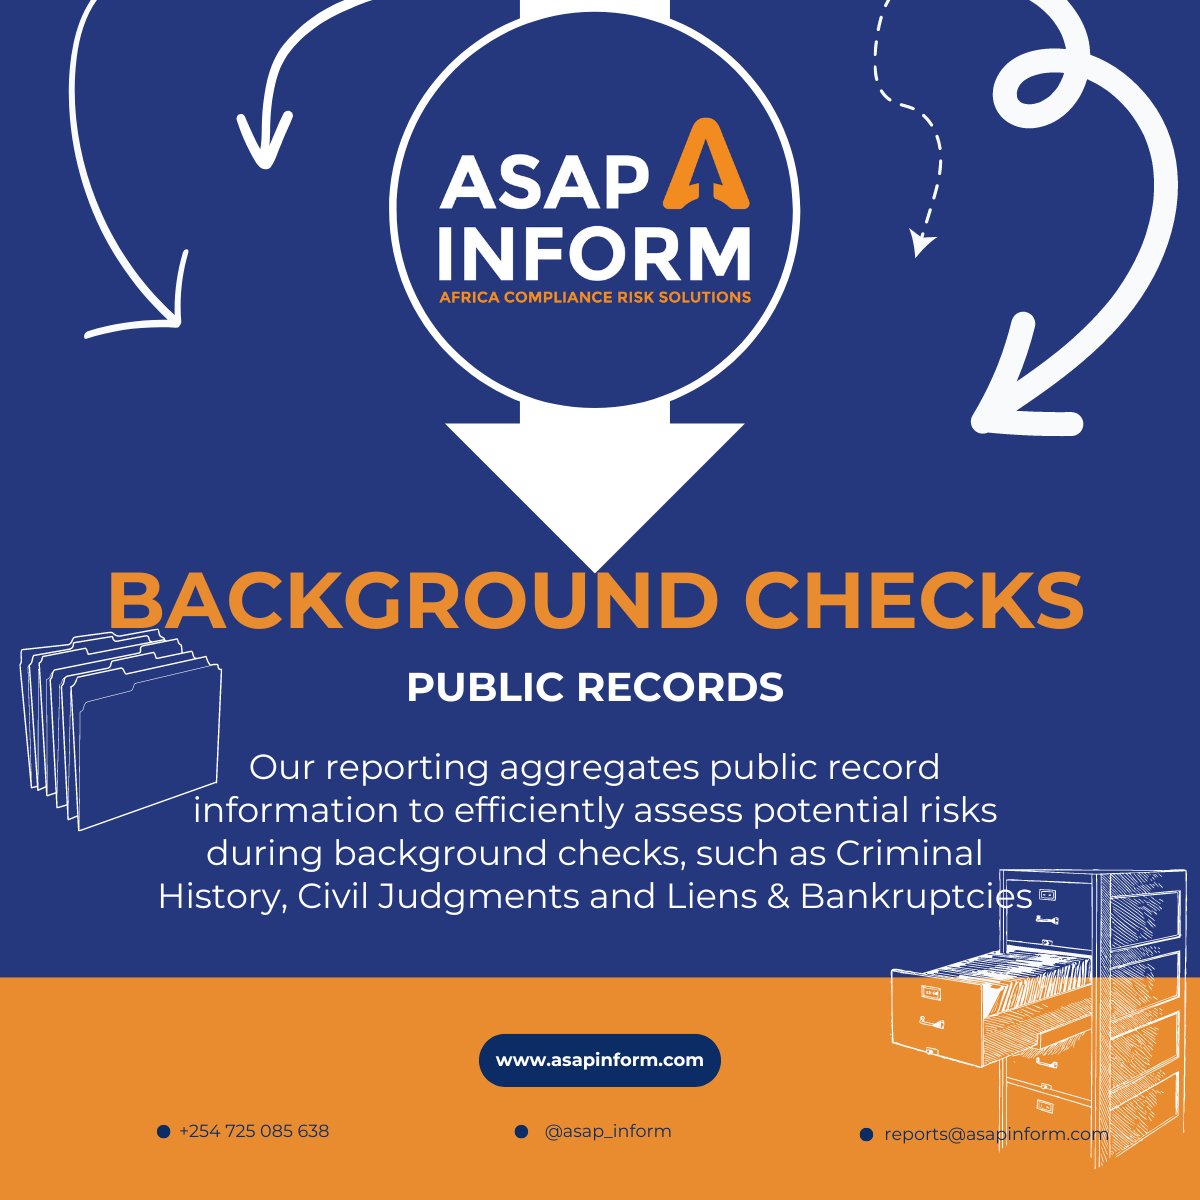 At #ASAP_Inform, we use public records to provide an in-depth analysis of risk. To learn more, contact us at reports@asapinform.com

#BackgroundChecks #PublicRecords #InformedDecisions